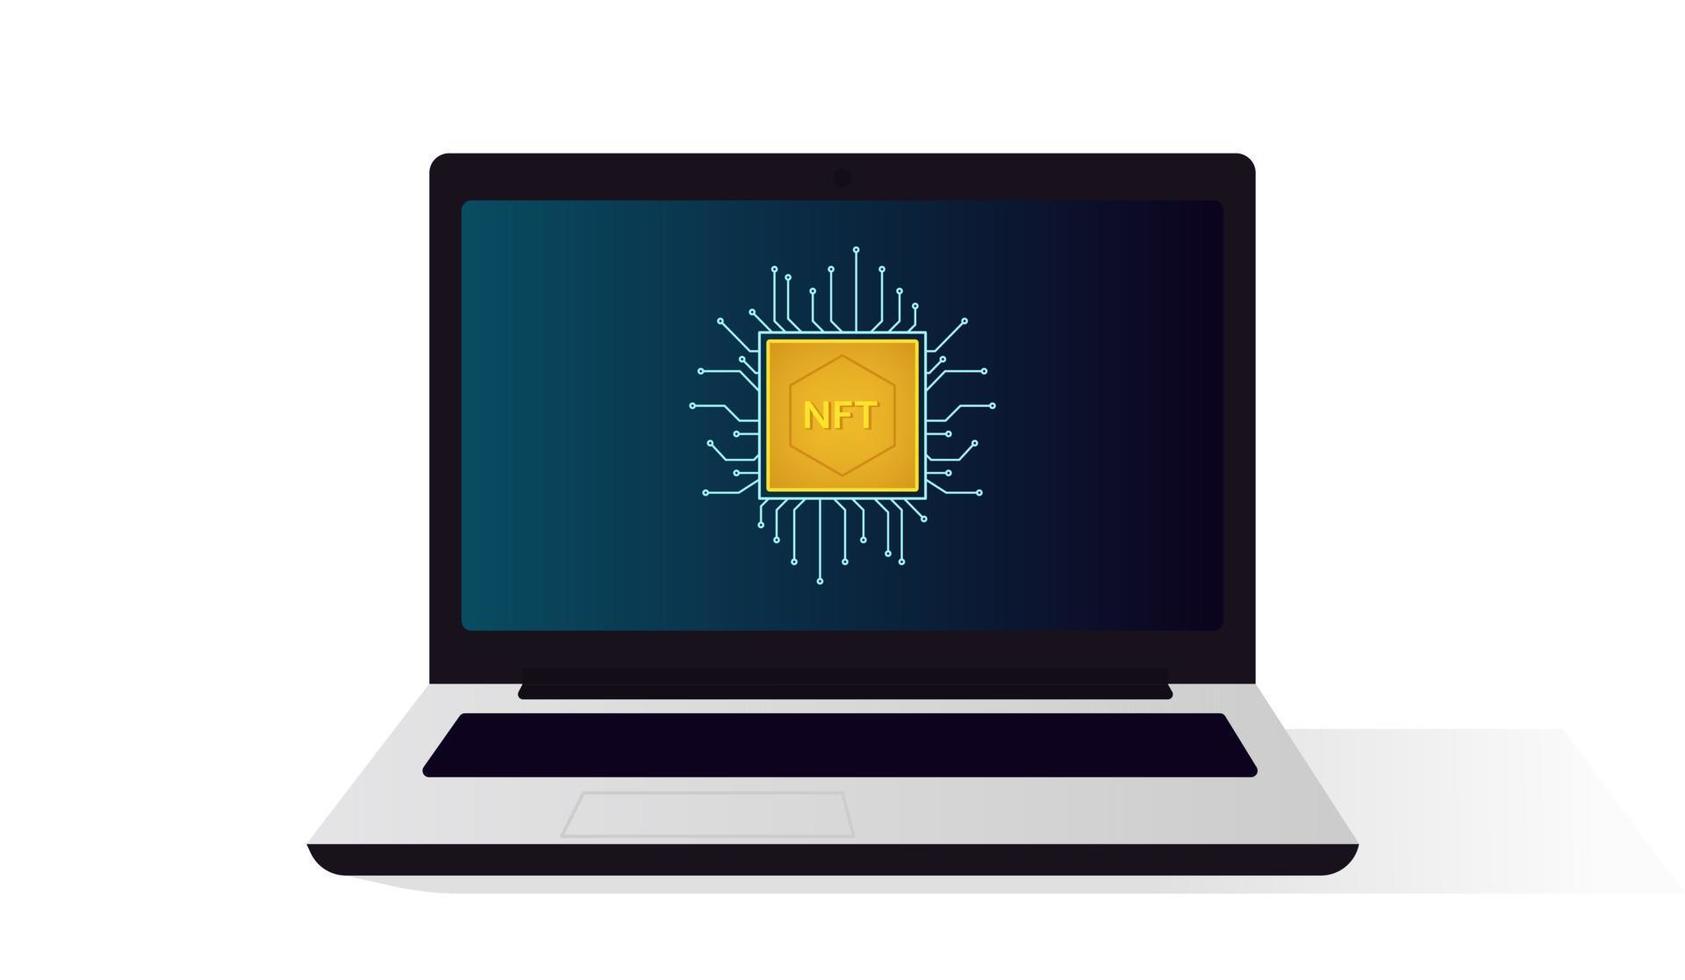 Isolated laptop with non-fungible token image on the screen. Digital art concept. Vector illustration